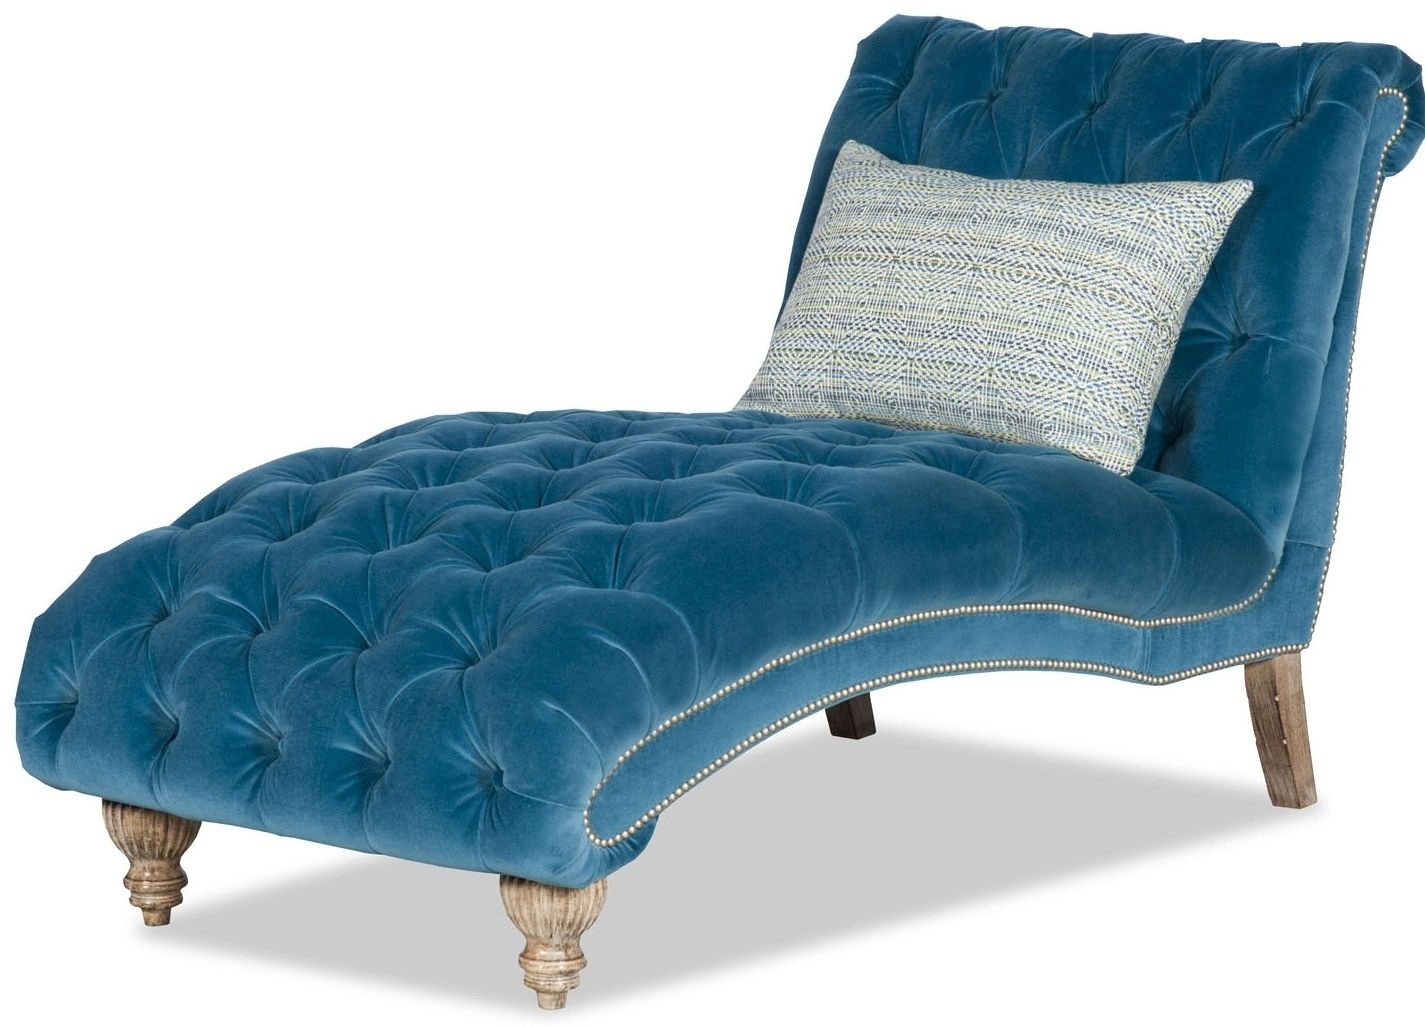 Peacock Blue Chaise Lounge In Favorite Blue Chaise Lounges (View 1 of 15)